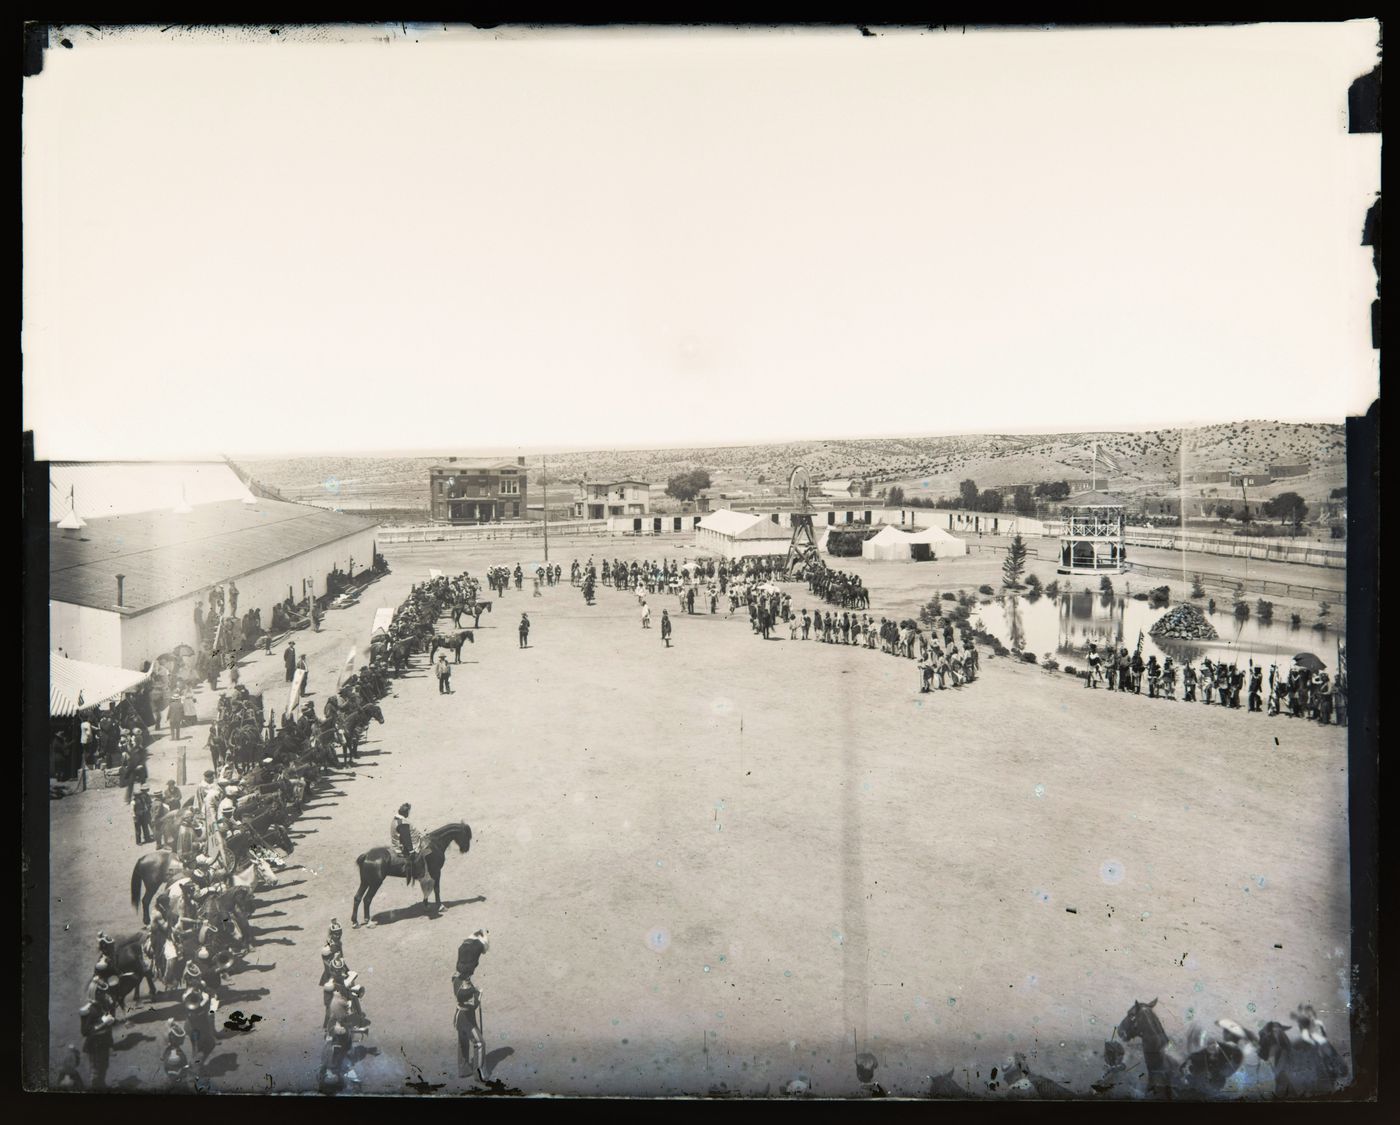 View of a fortified (?) camp where a large gathering of Indigenous people and uniformed men on horseback is taking place, (possibly) Arizona, United States of America